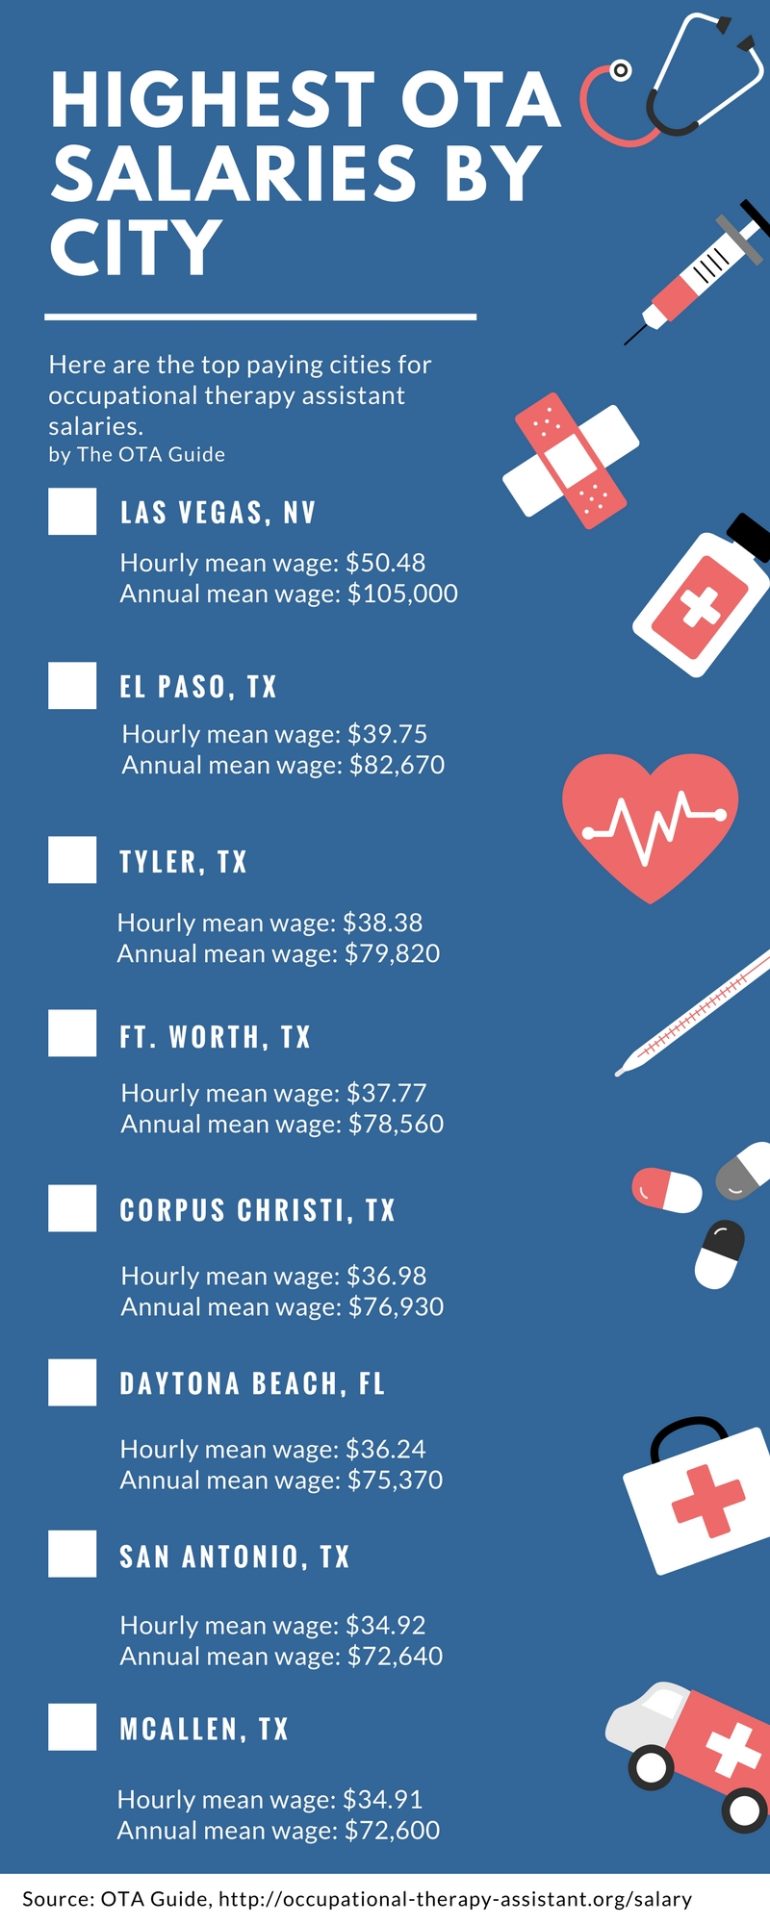 Highest Paying Cities for Occupational Therapy Assistants by Hourly & Annual Wage